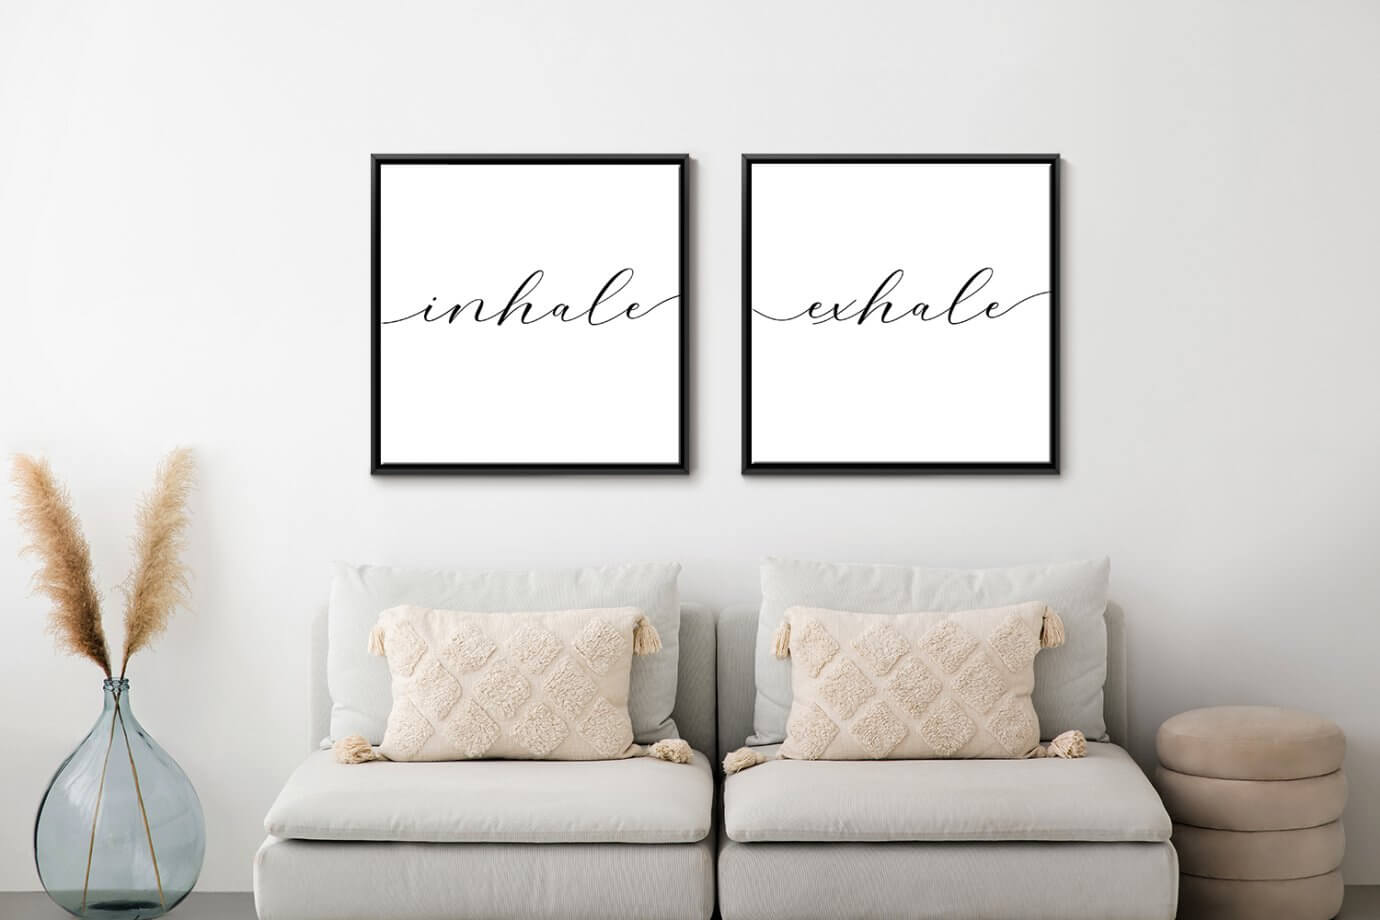 inhale and exhale art prints above couch